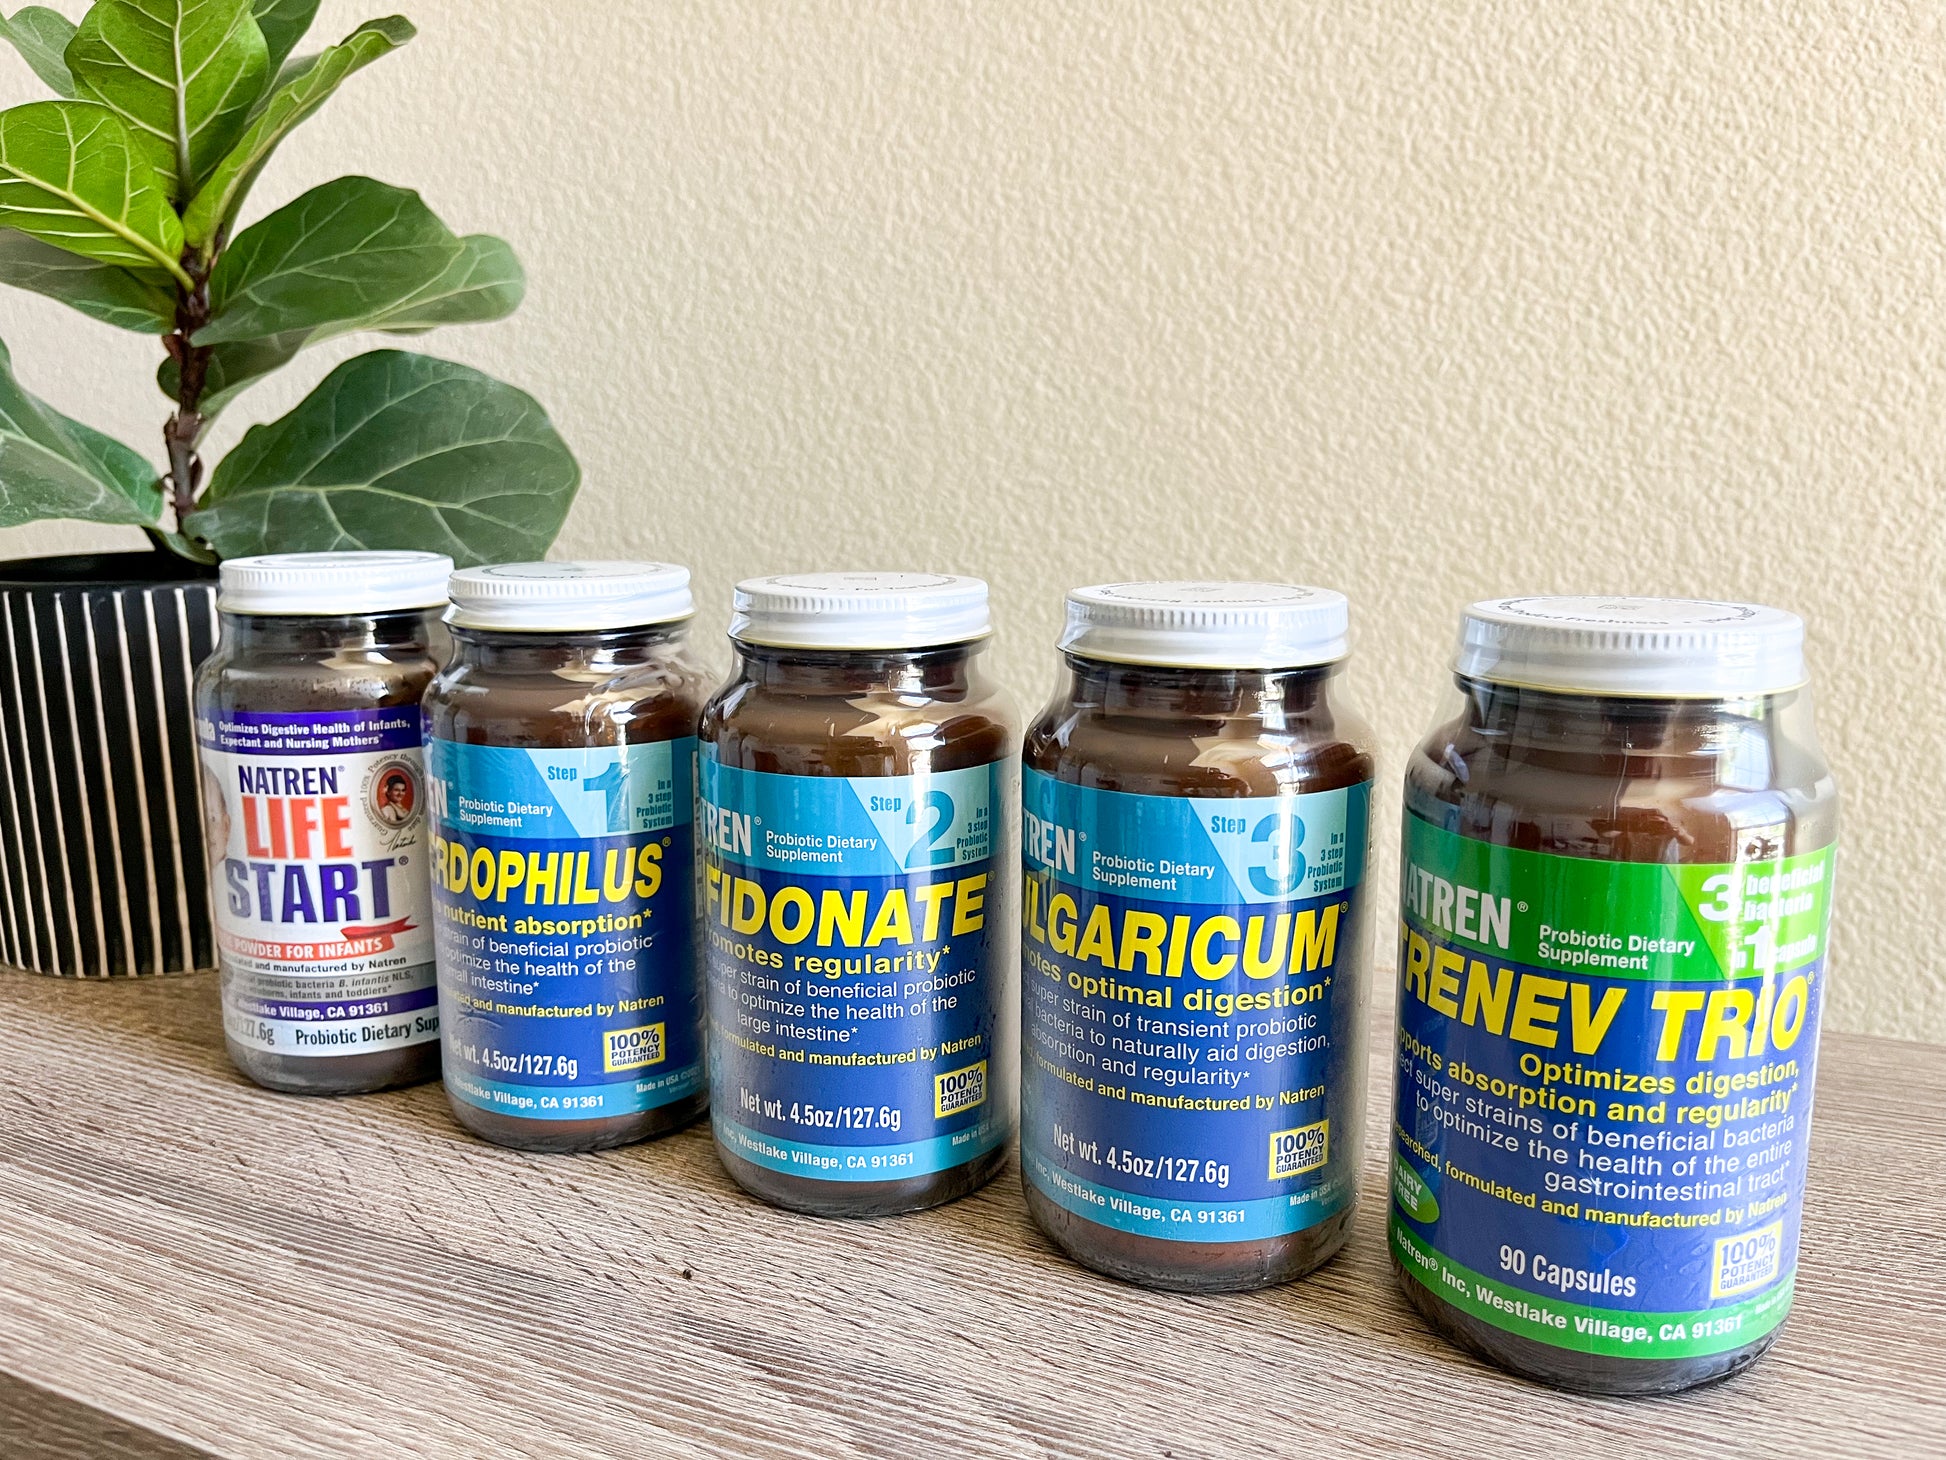 Natren Probiotics - ultimate solution of digestion - PROBIOTICS FOR THE WHOLE FAMILY